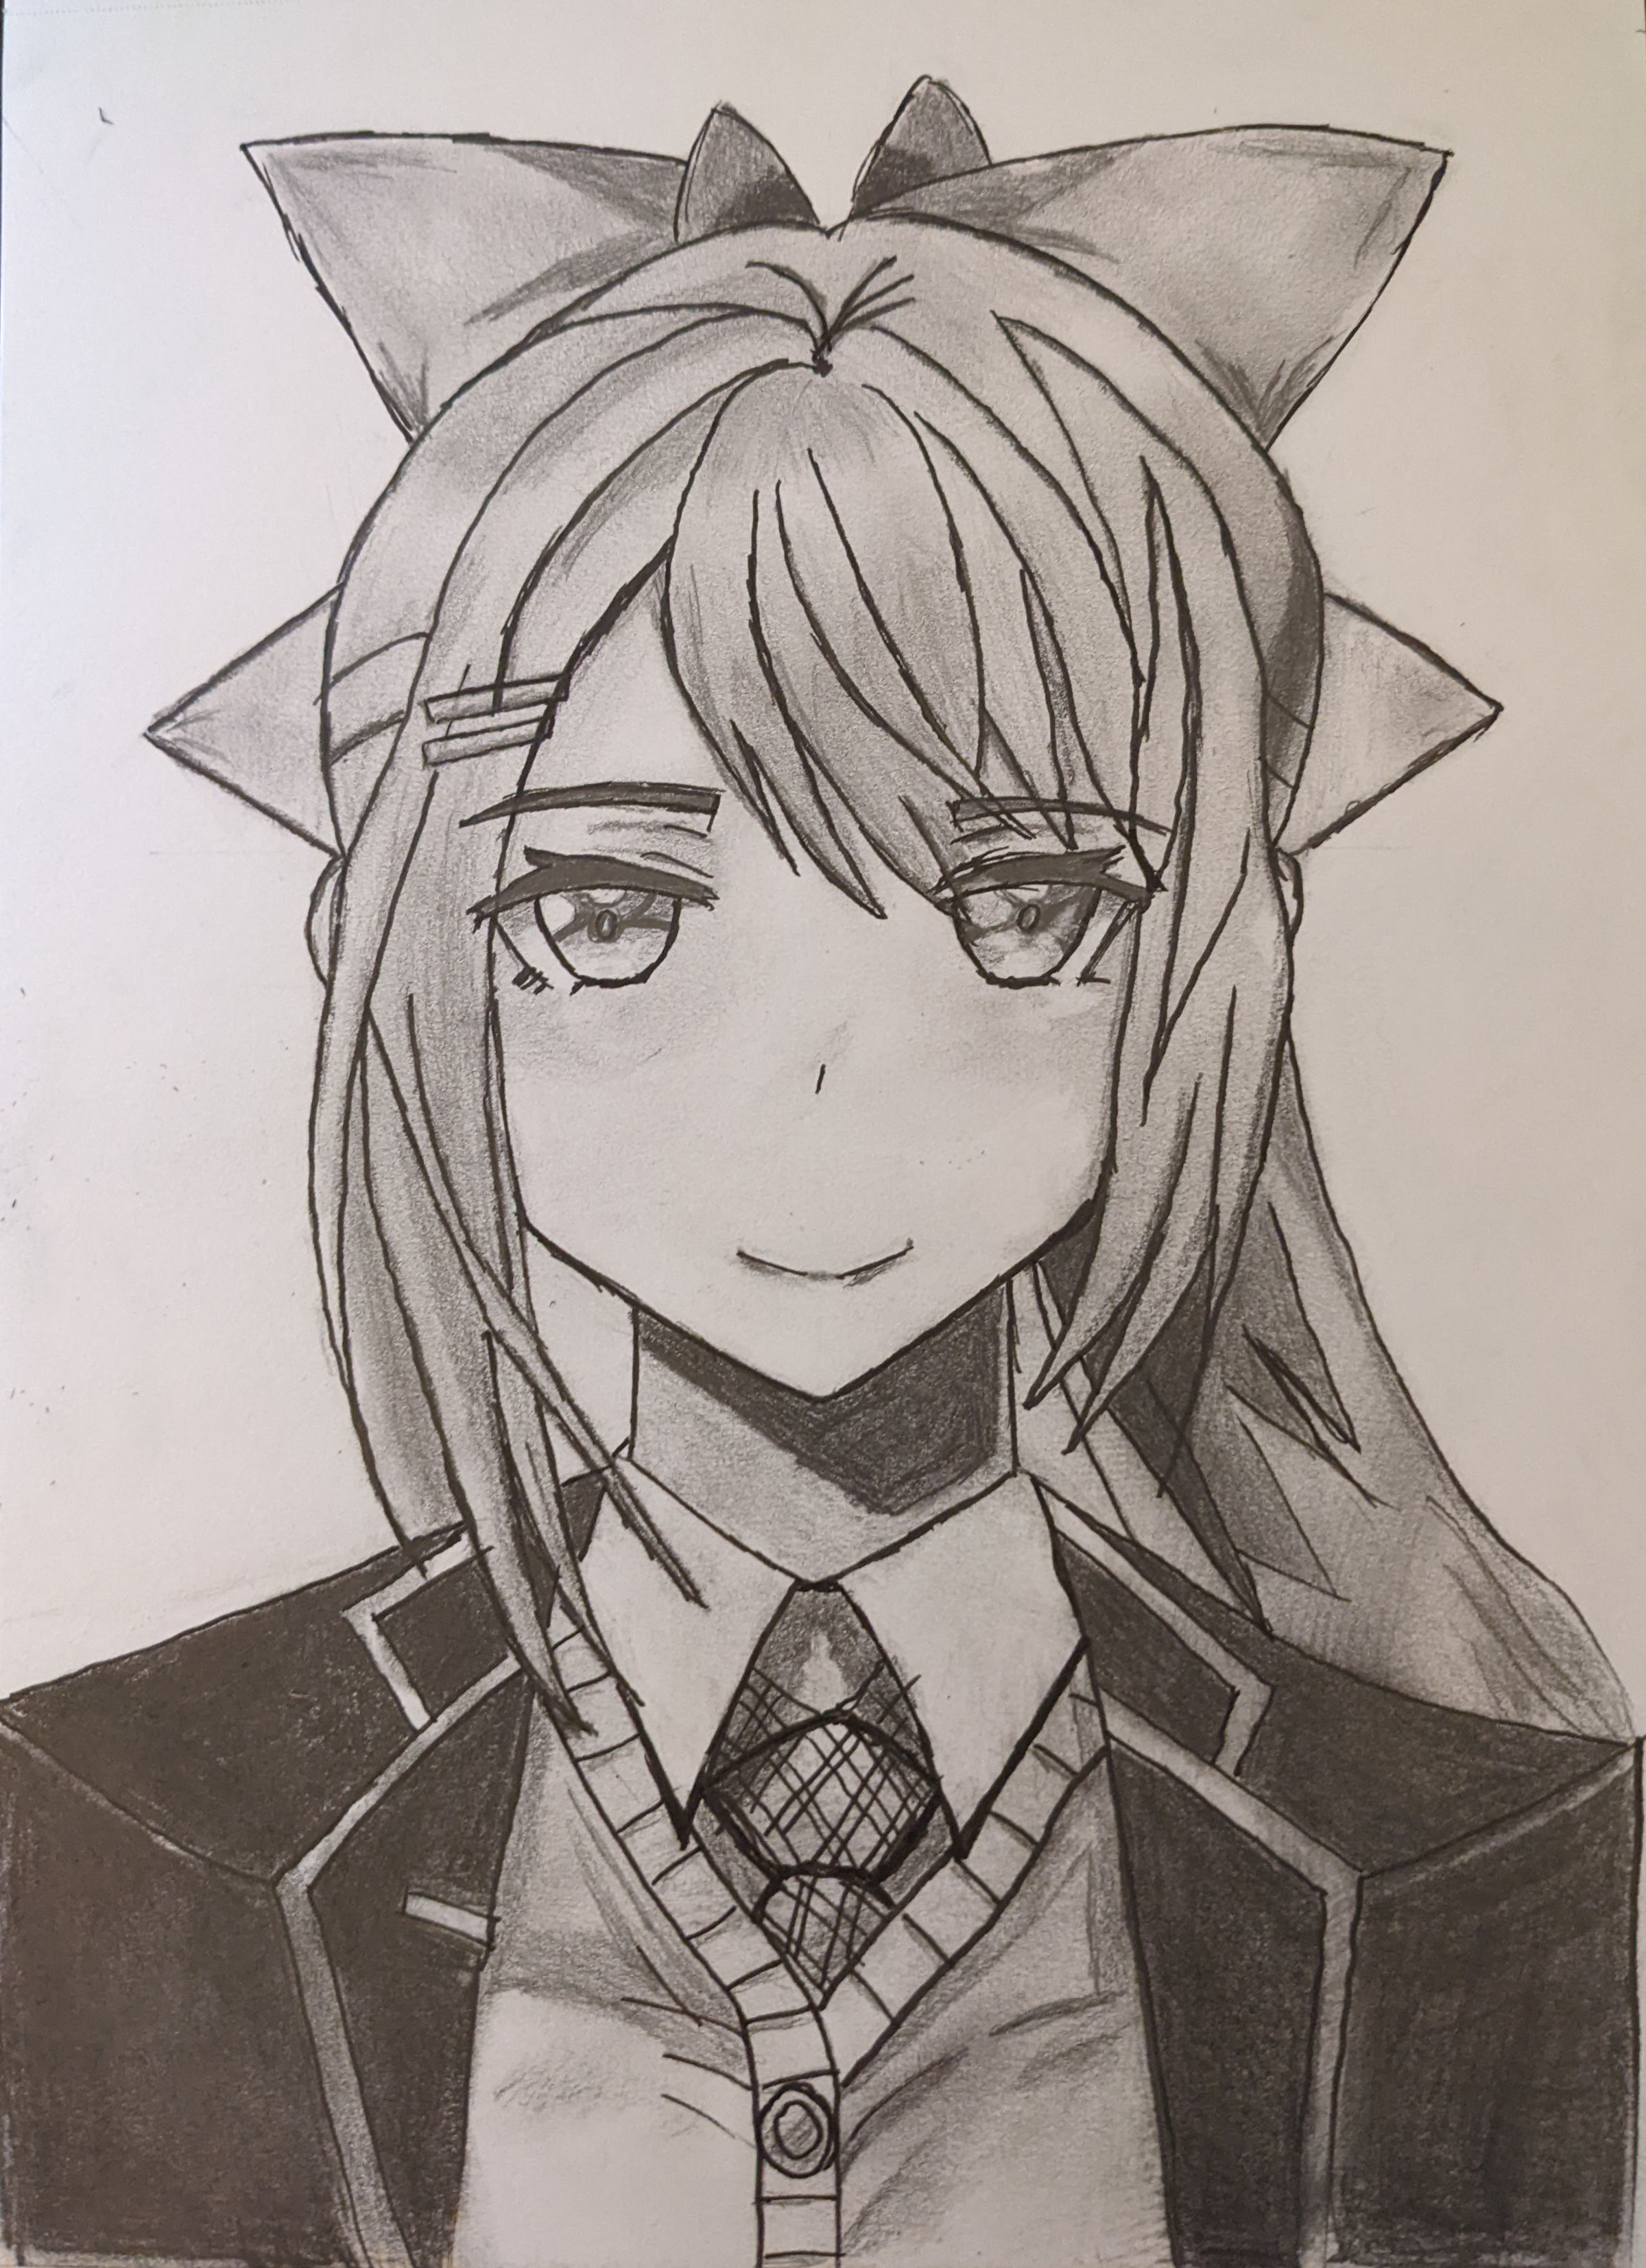 Sketch of a manga teen girl with light hair, wearing a suit and tie.